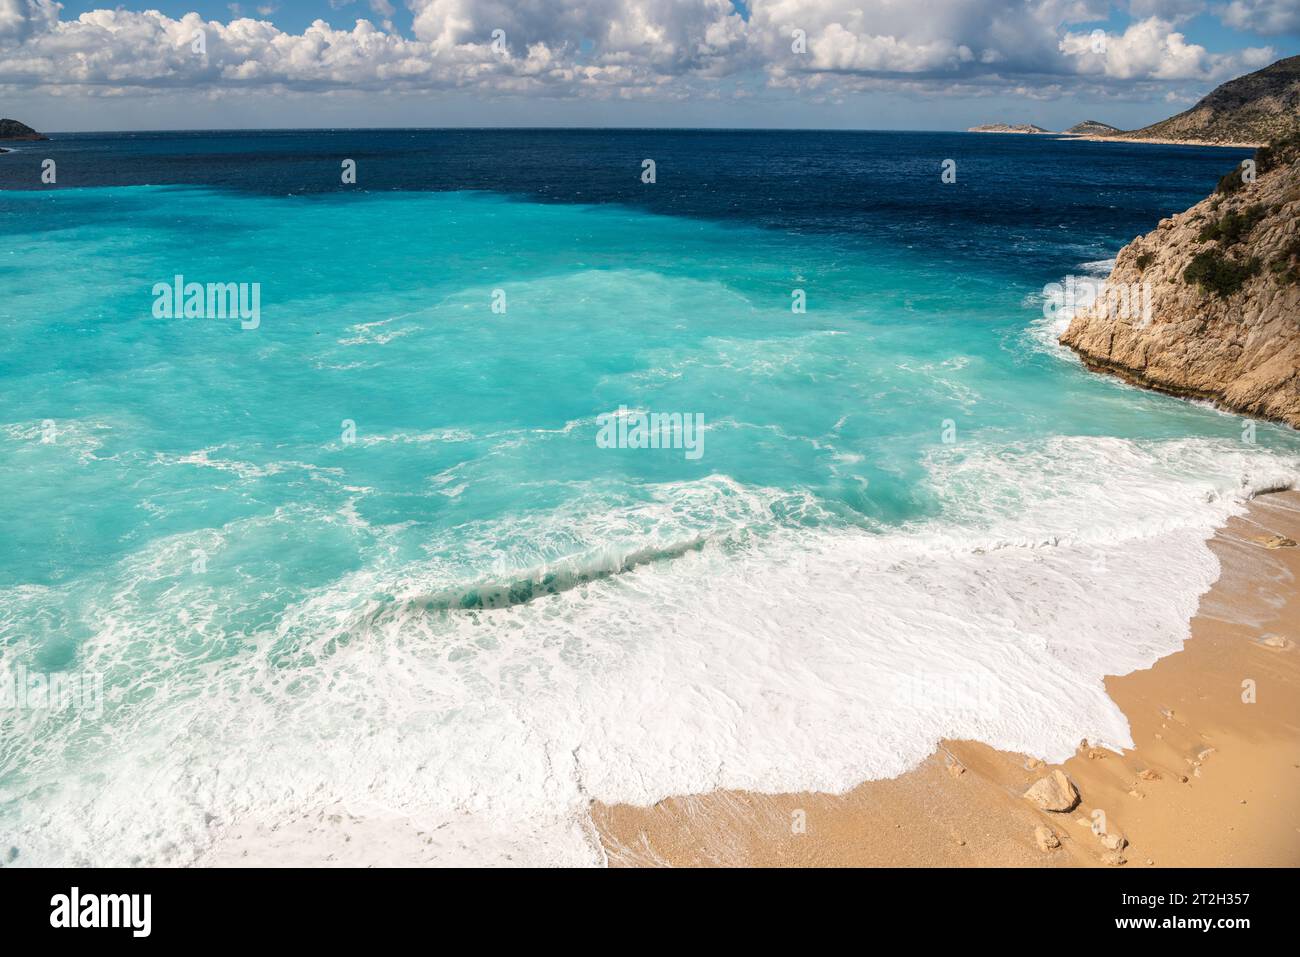 Kaputas beach near Kalkan town in Antalya province of Turkey. View on a stormy day in spring. Stock Photo